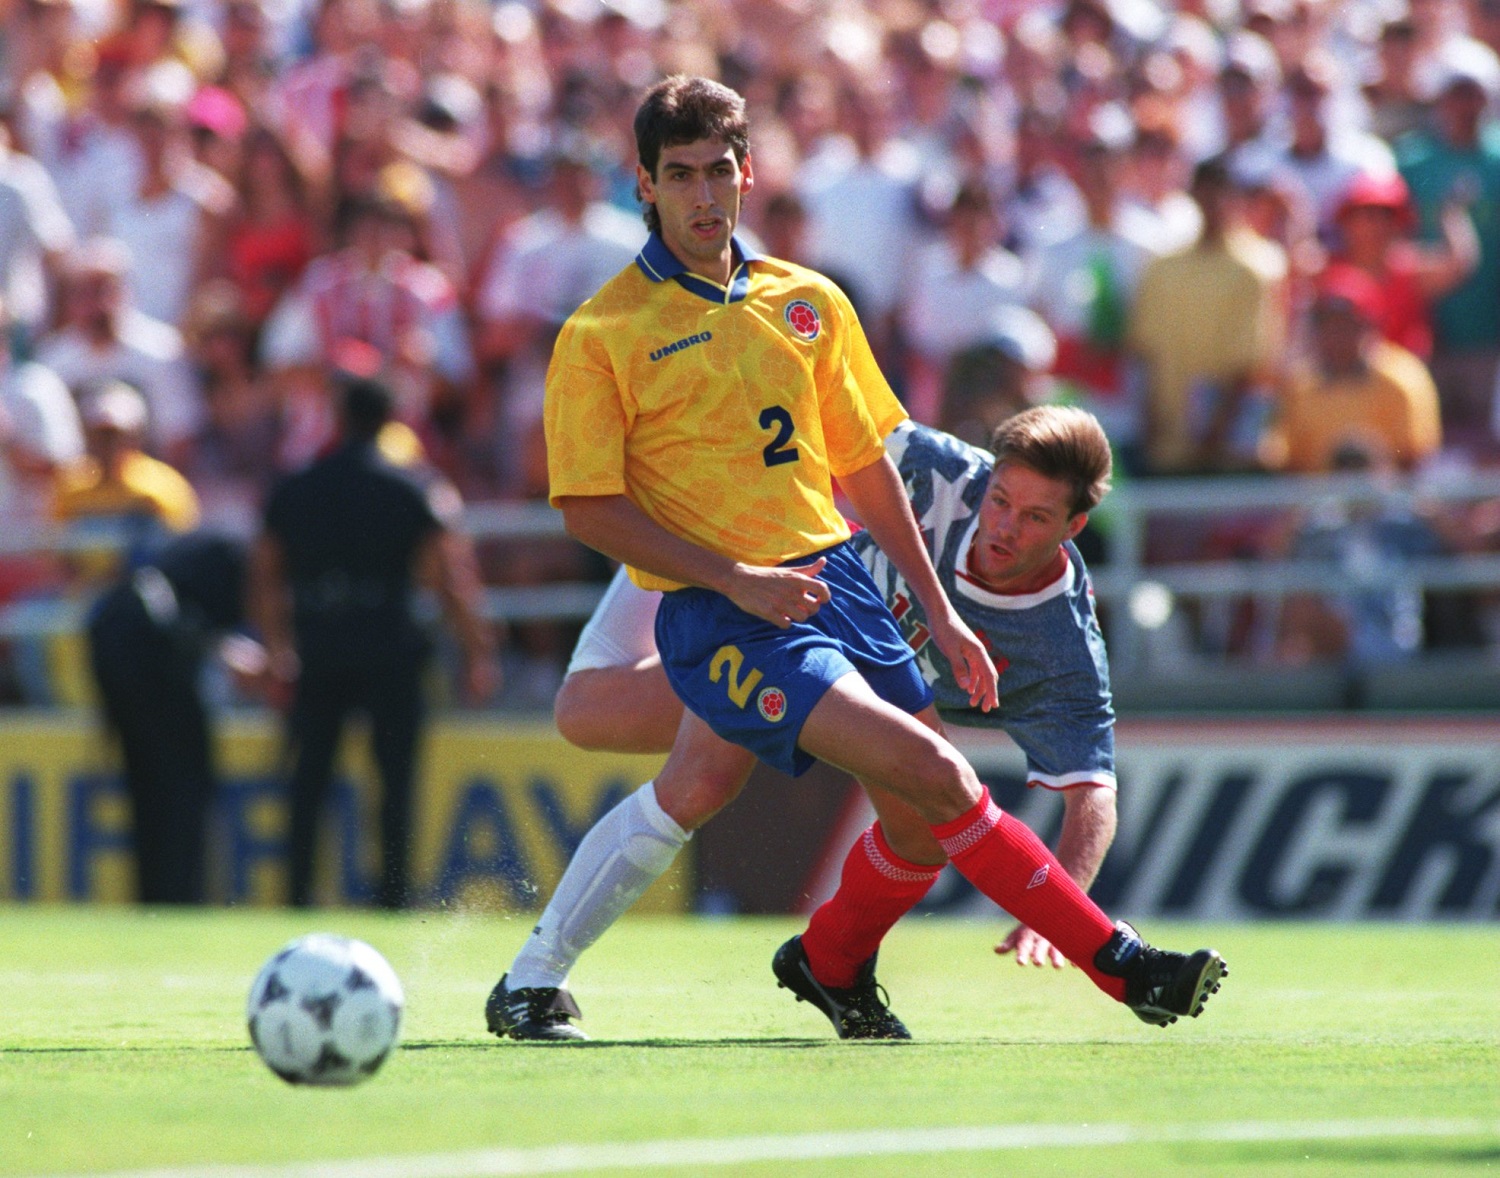 Andres Escobar kicks the soccer ball in a game against the United States during the 1994 World Cup